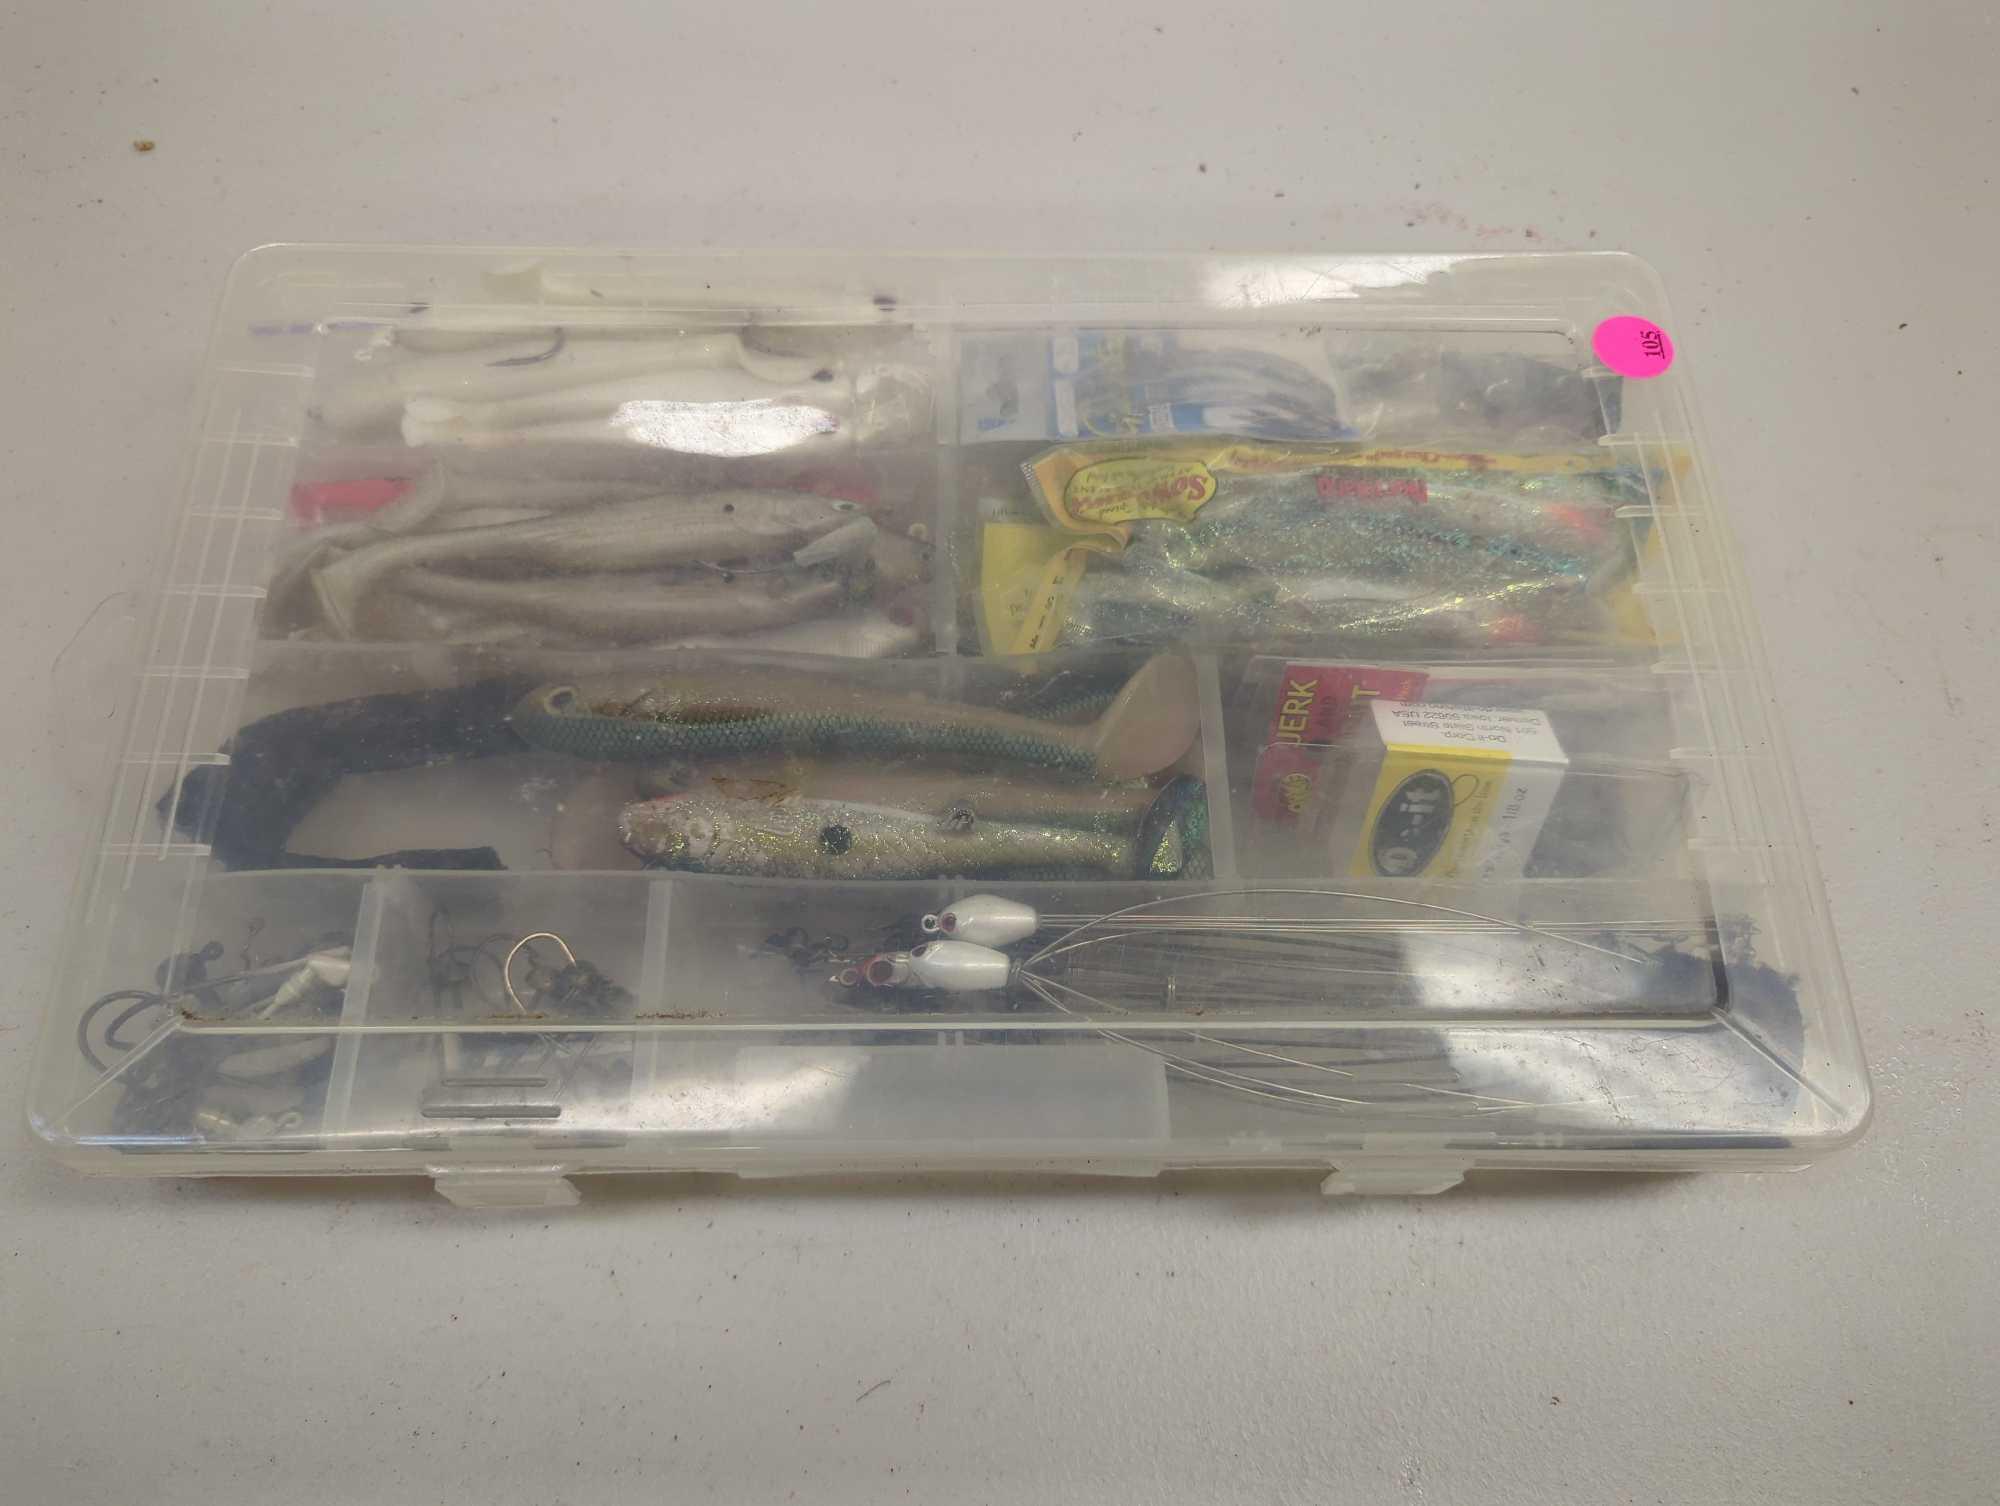 Tackle Box and contents including various fishing lures and other fishing accessories. Comes as is